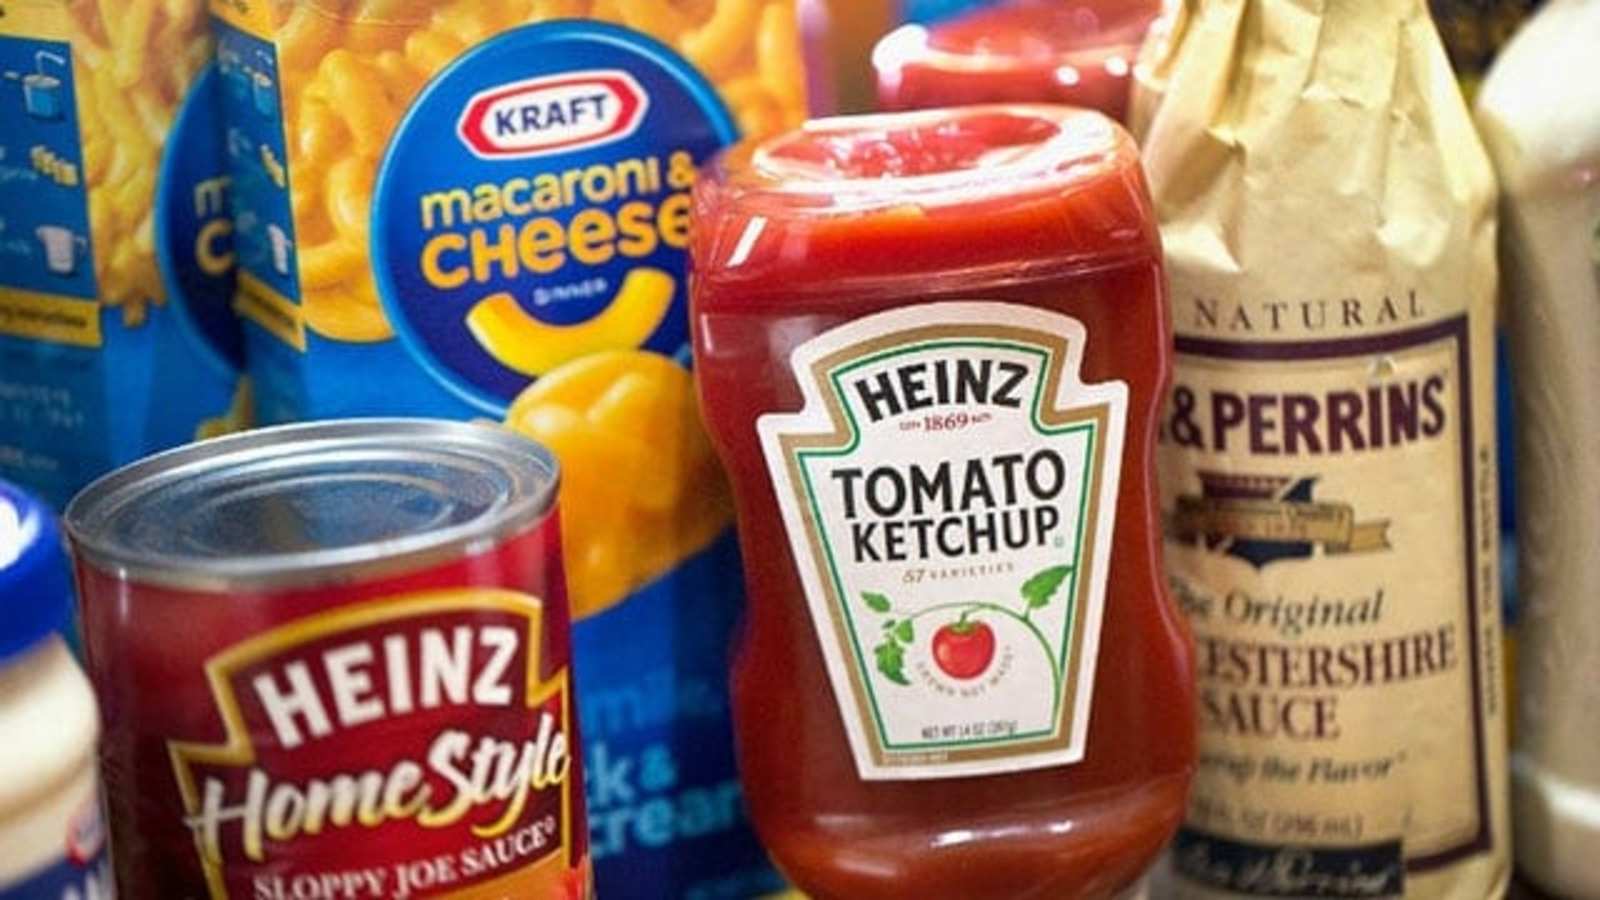 Kraft Heinz Q3 revenue rise as consumers cook more food at home